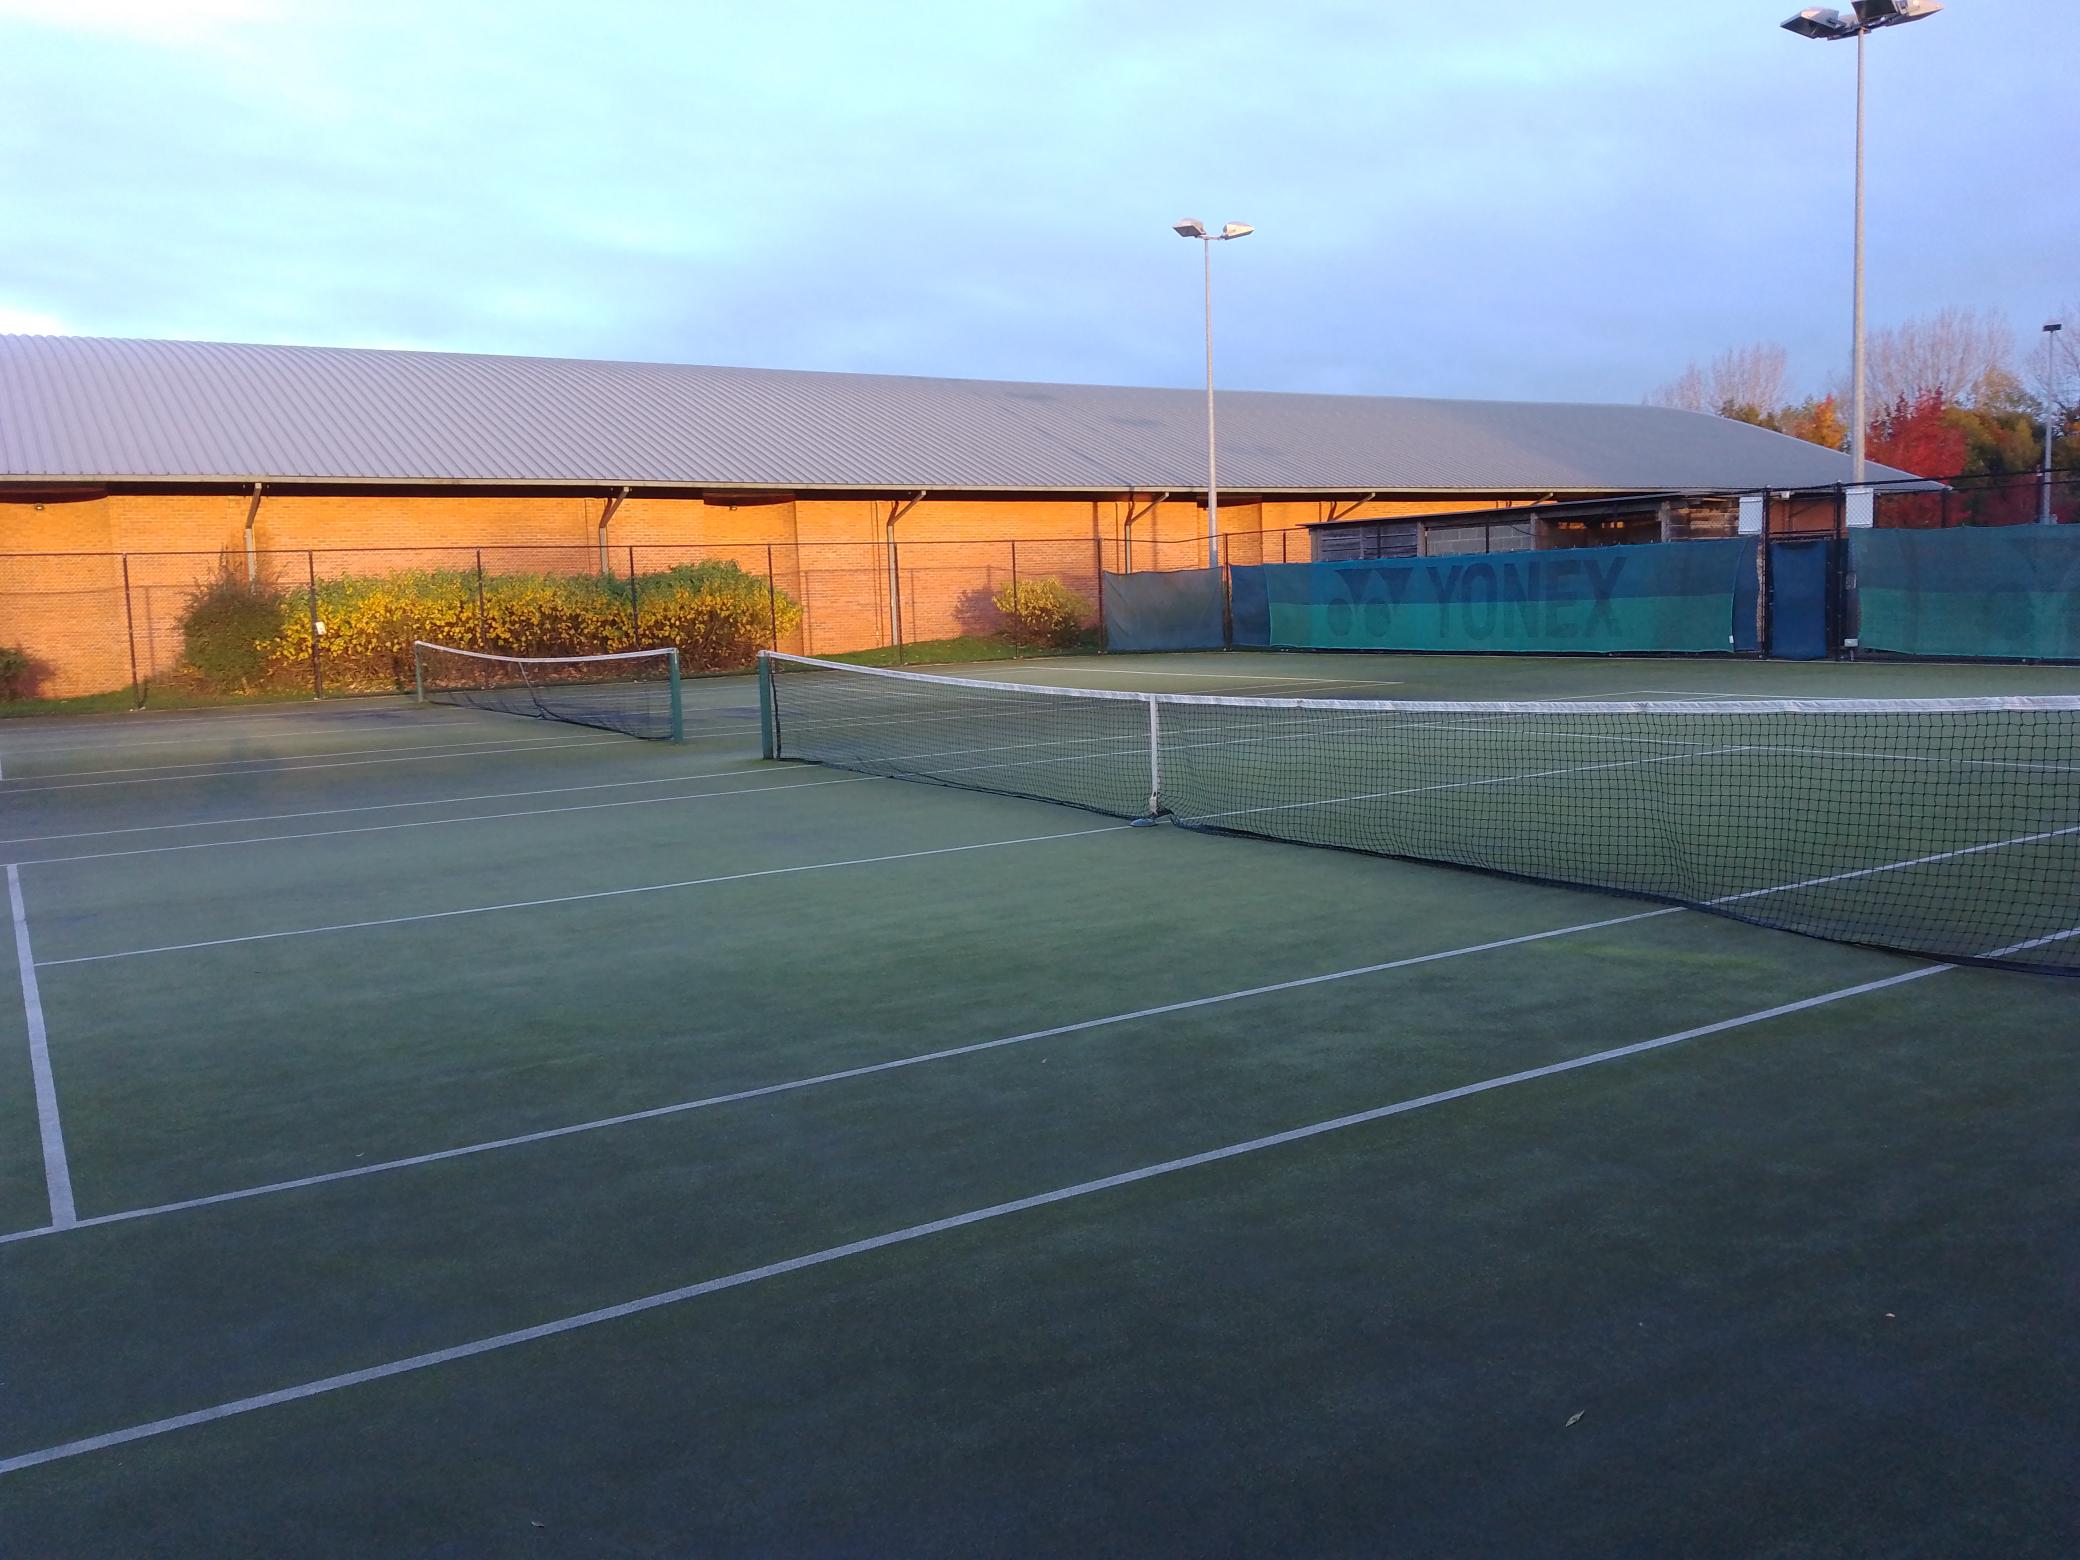 The current tennis court area at White Horse Leisure and Tennis Centre before refurbishment